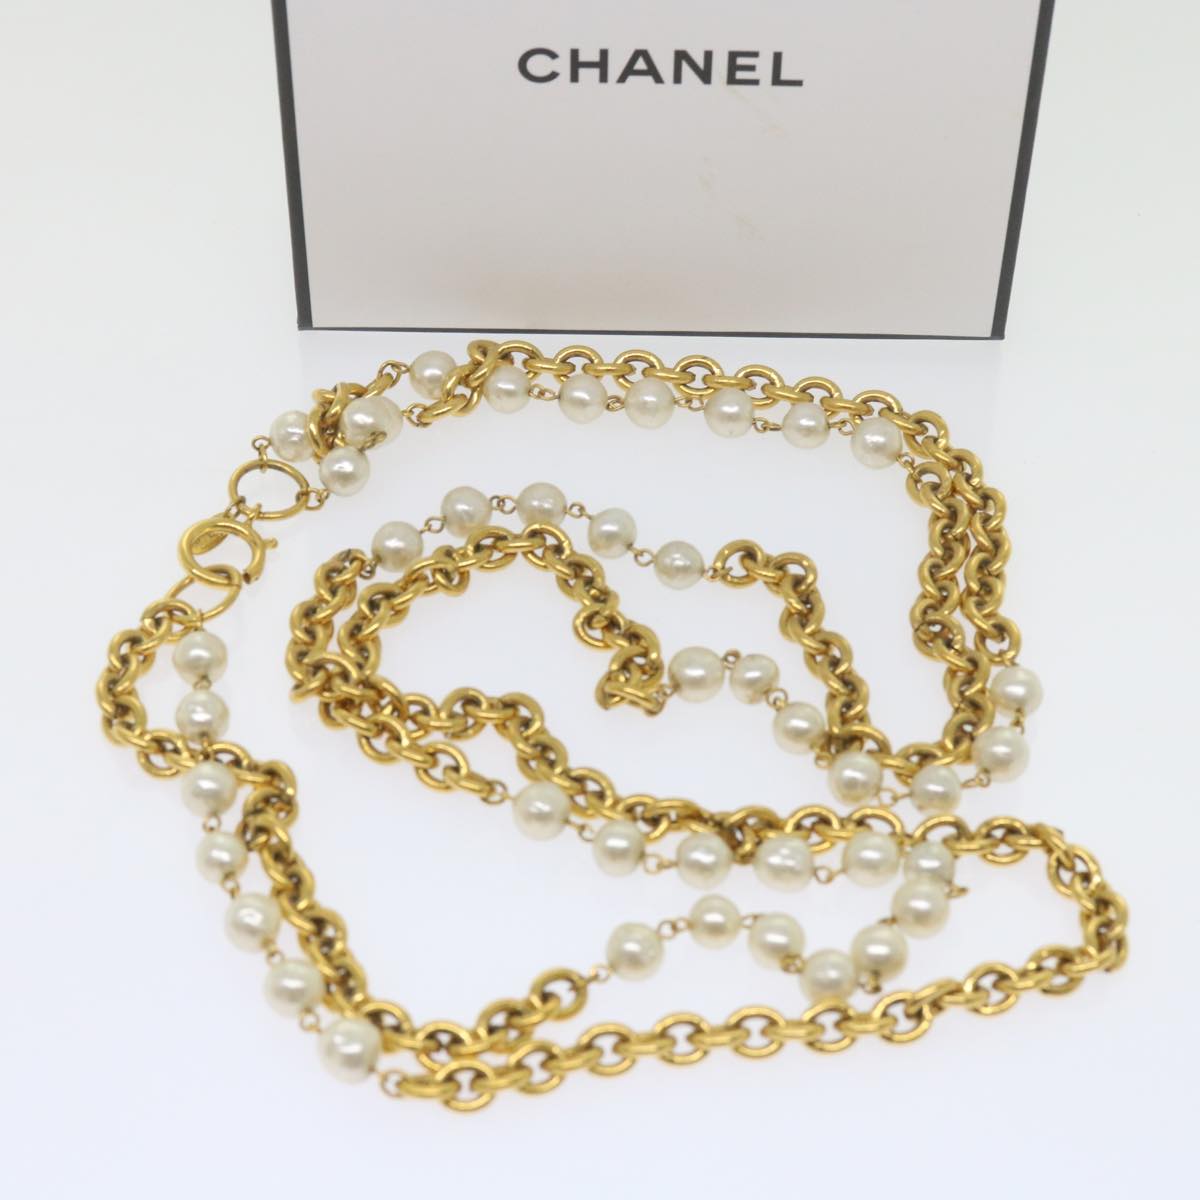 CHANEL Necklace Gold Tone CC Auth bs10911